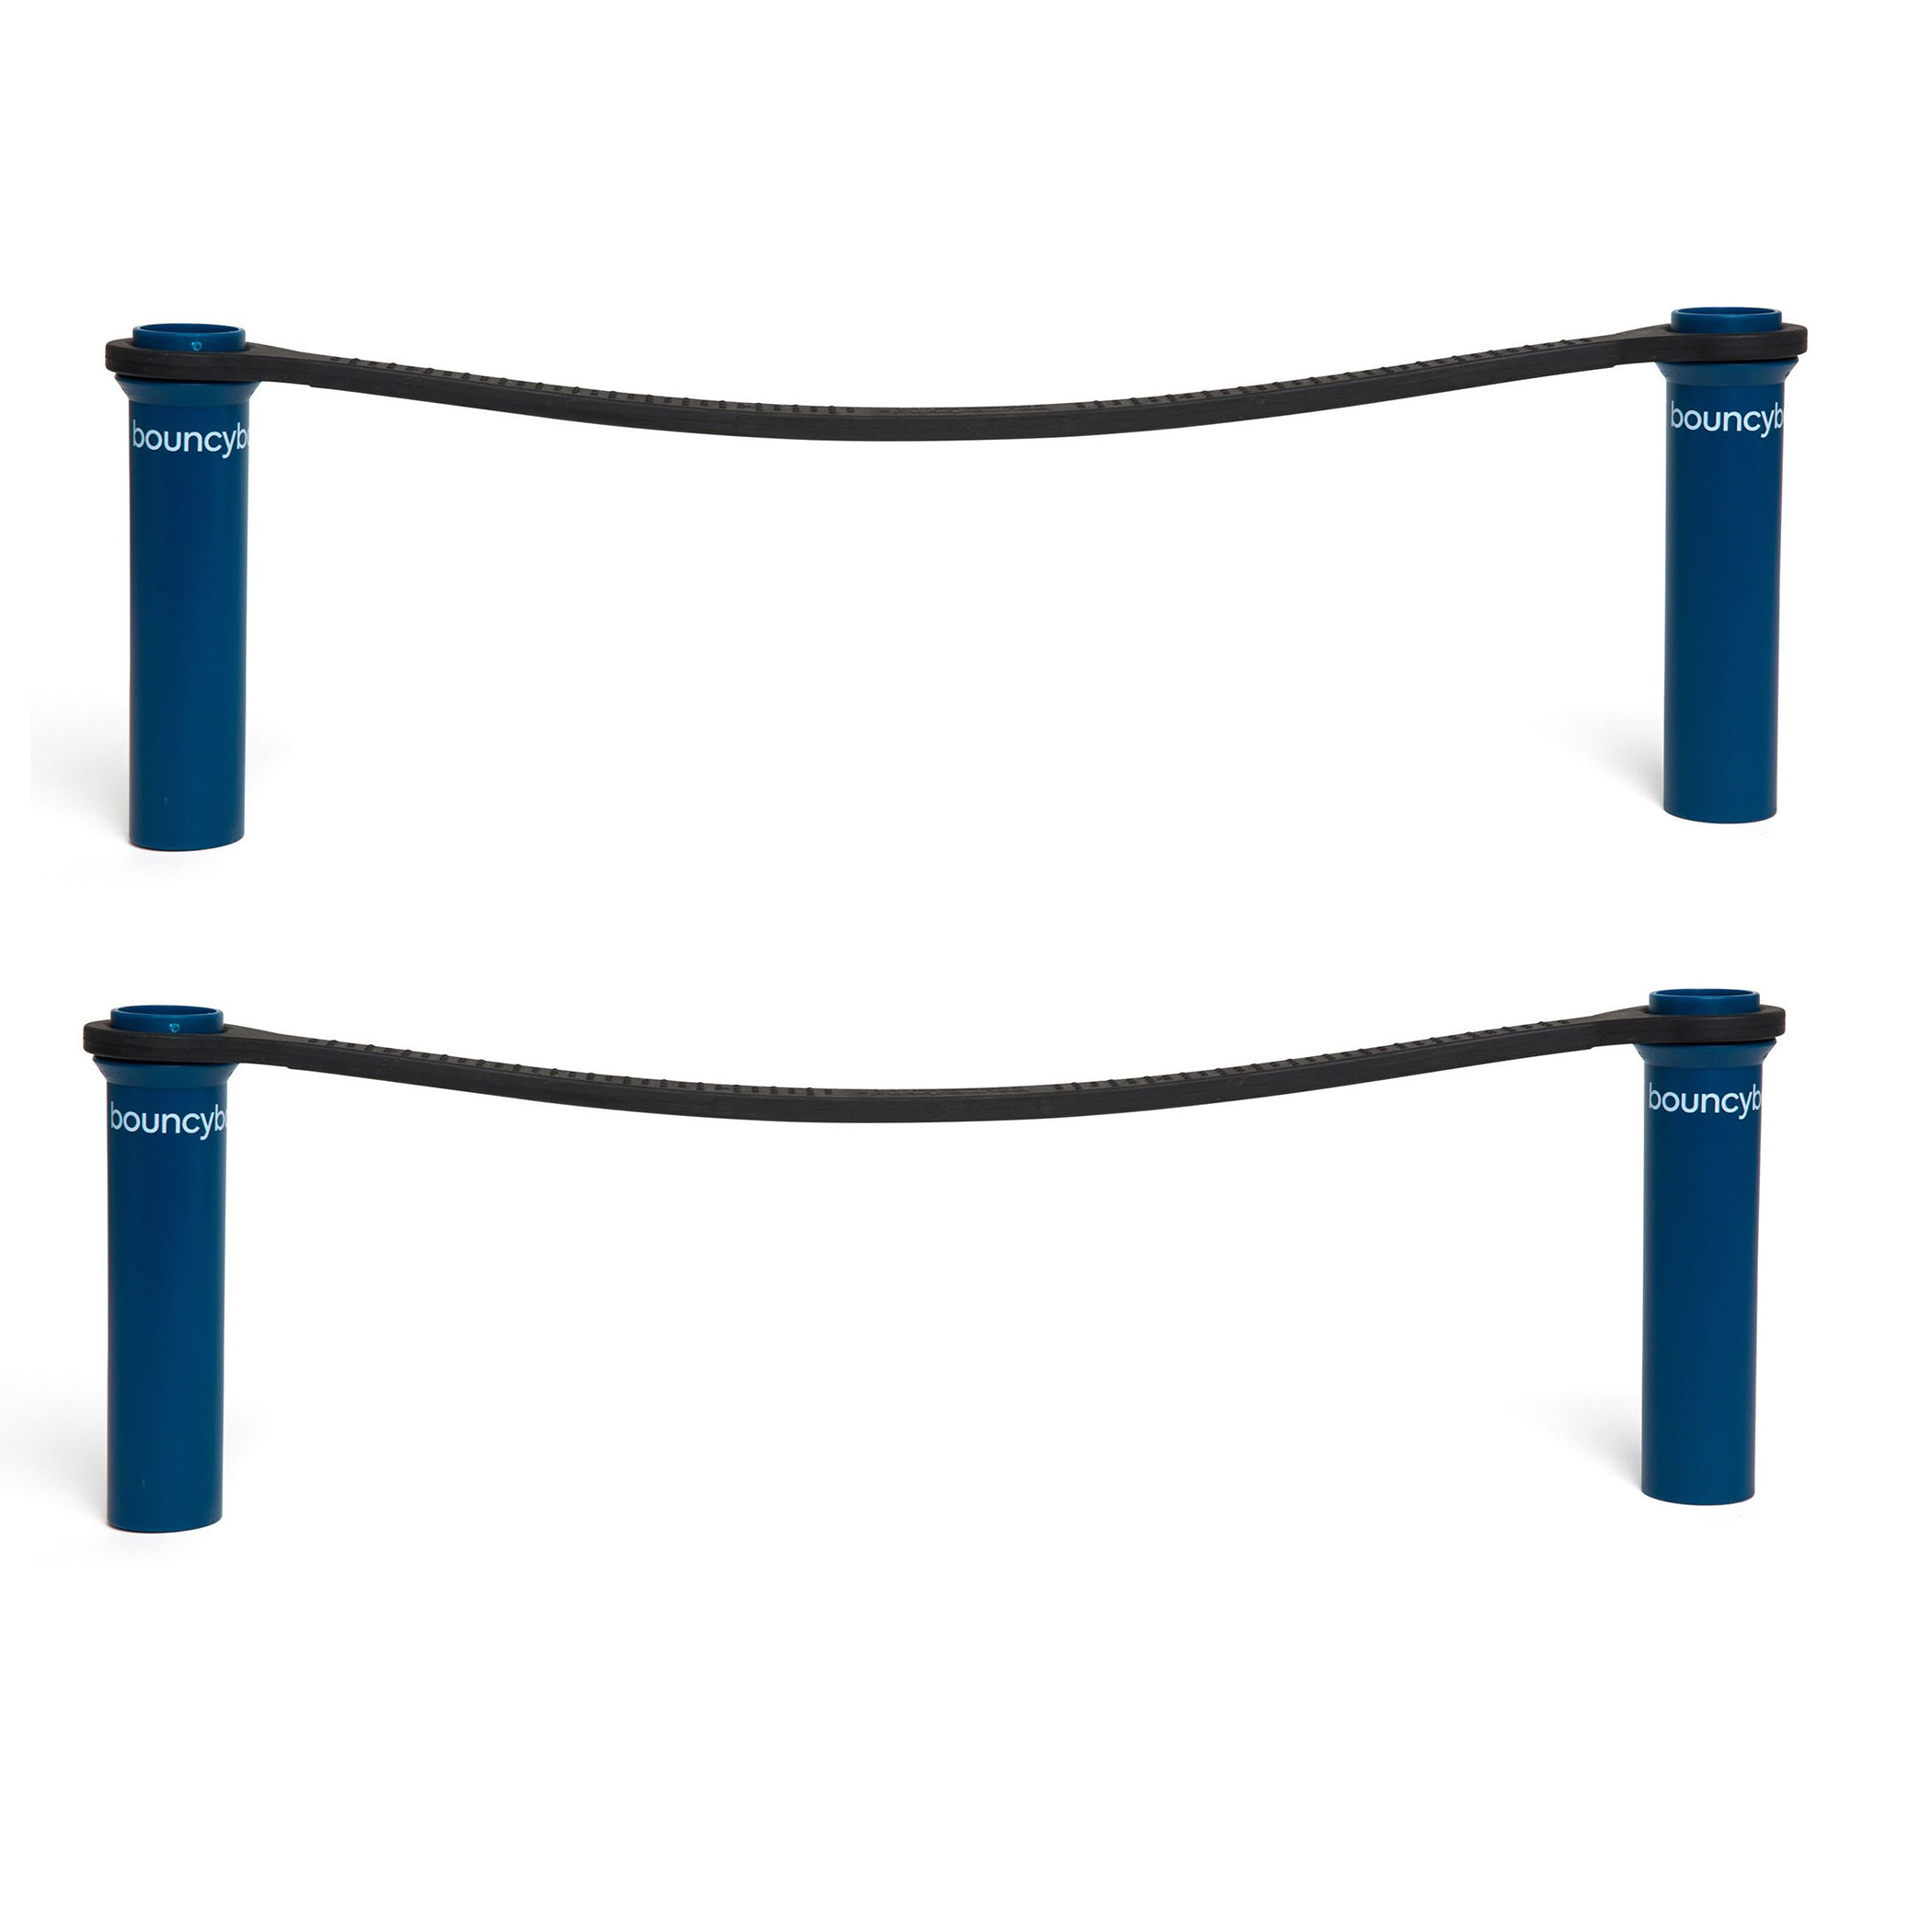 Bouncybands for Extra-Wide School Desks, Blue Tubes, Pack of 2